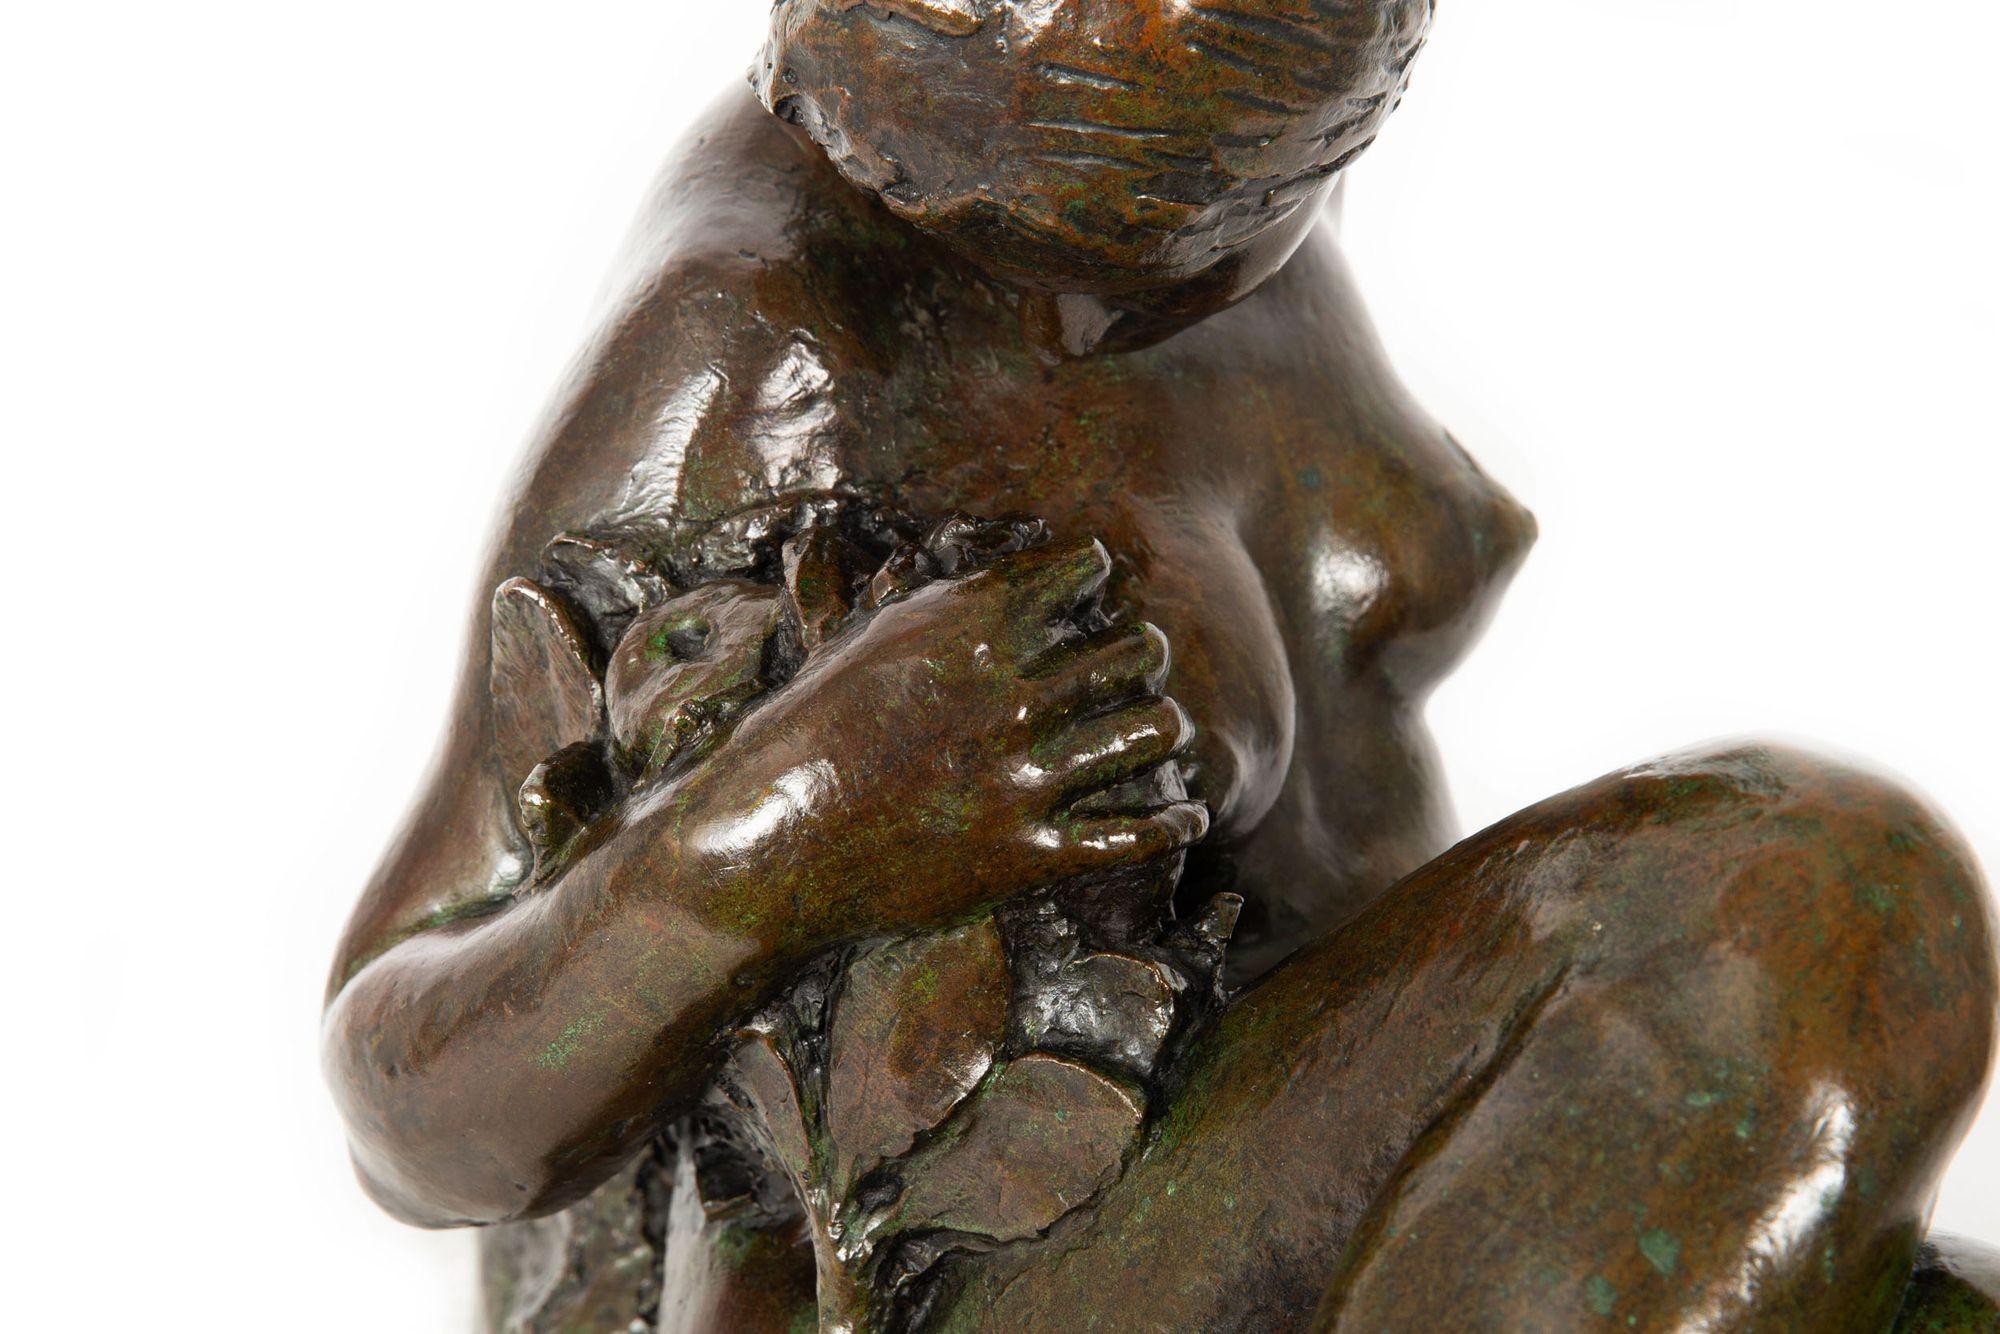 Rare French Modernist Bronze Sculpture of “Eve” (1937) by Aime Octobre For Sale 7